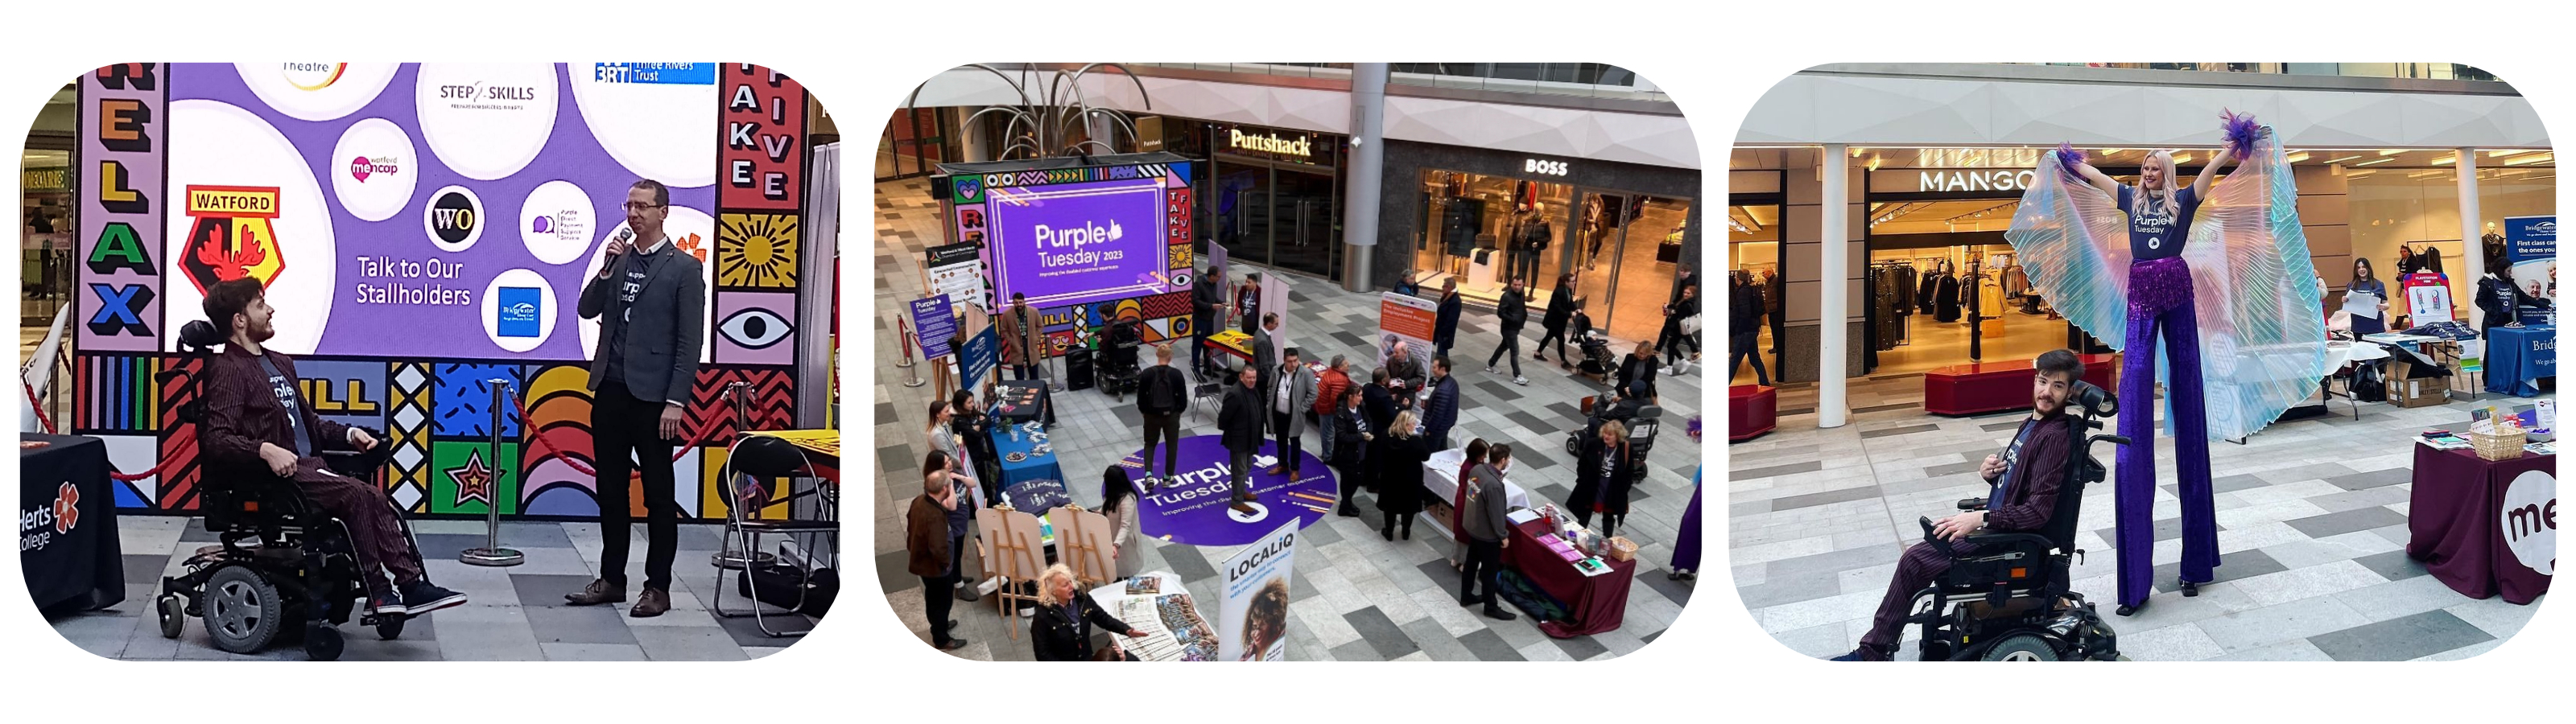 3 images combined into one, image one is Lee Keogh in a wheelchair on stage, addressing the audience in front of a screen featuring various logos, including Purple Tuesday, image two is a top-down view of the Purple Tuesday celebration at Watford Shopping Center and image three is Lee Keogh in a wheelchair alongside a person on stilts, both adorned in purple attire.